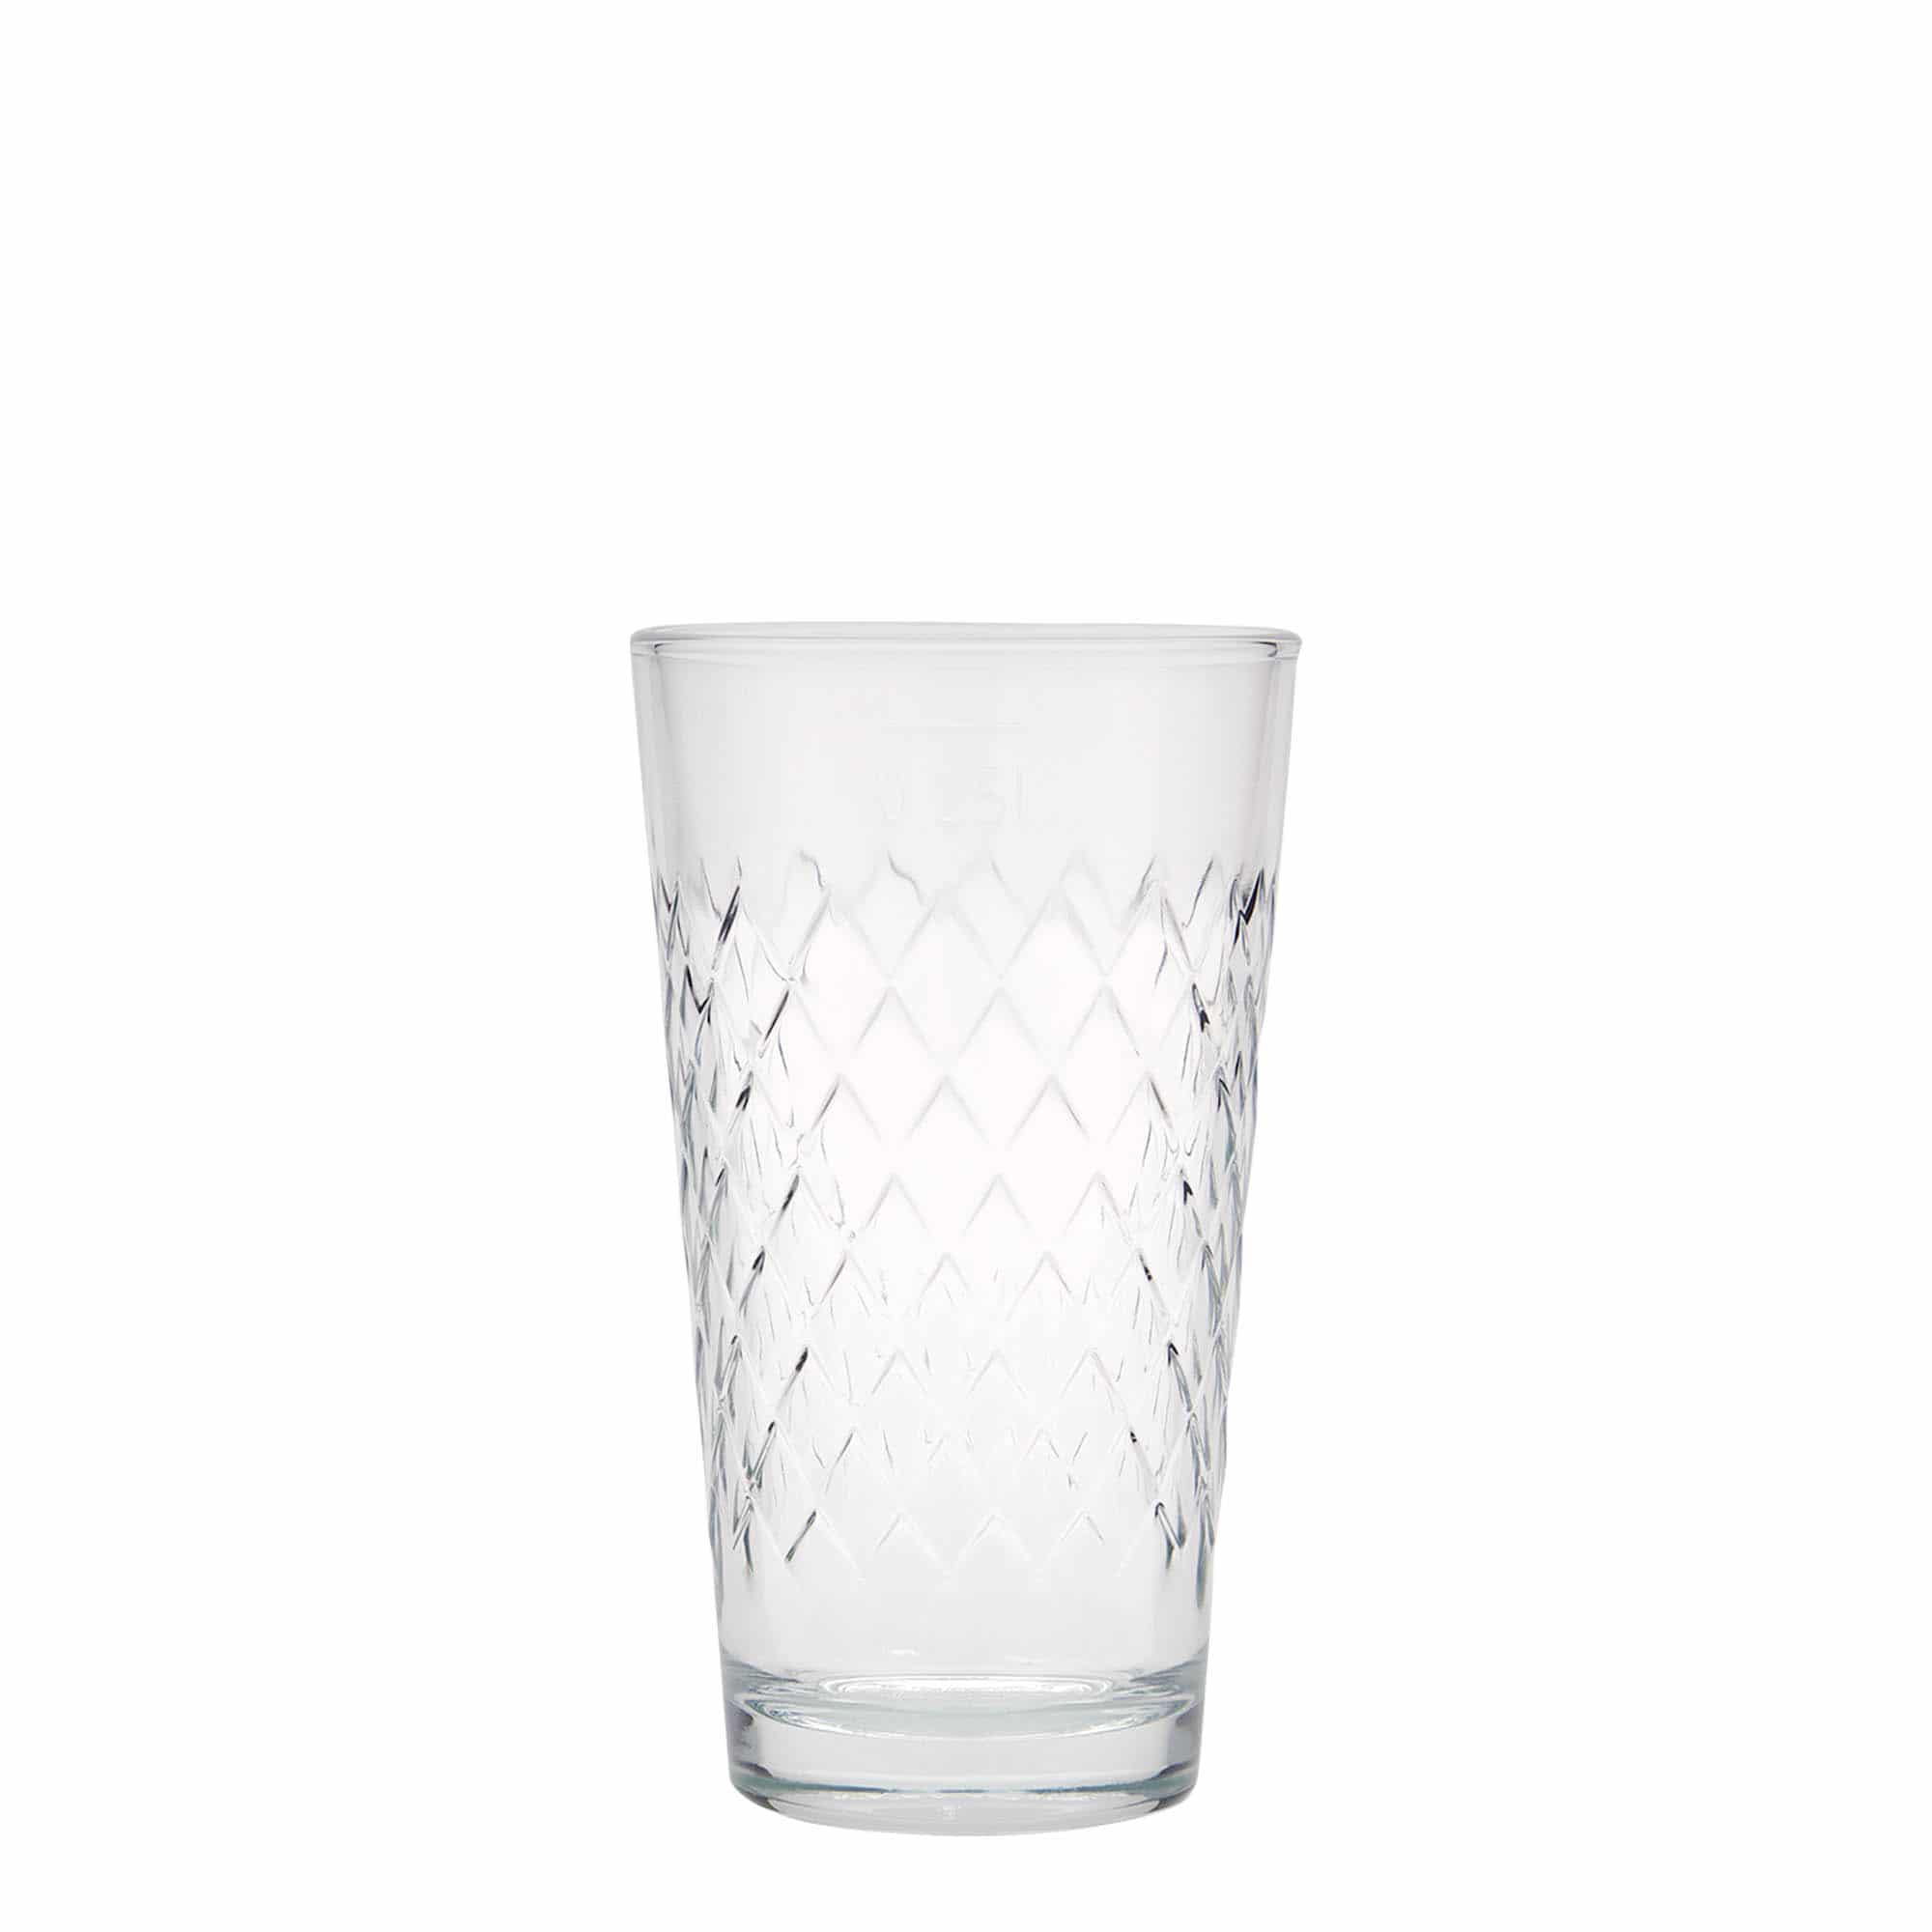 250 ml drinking glass for apple wine